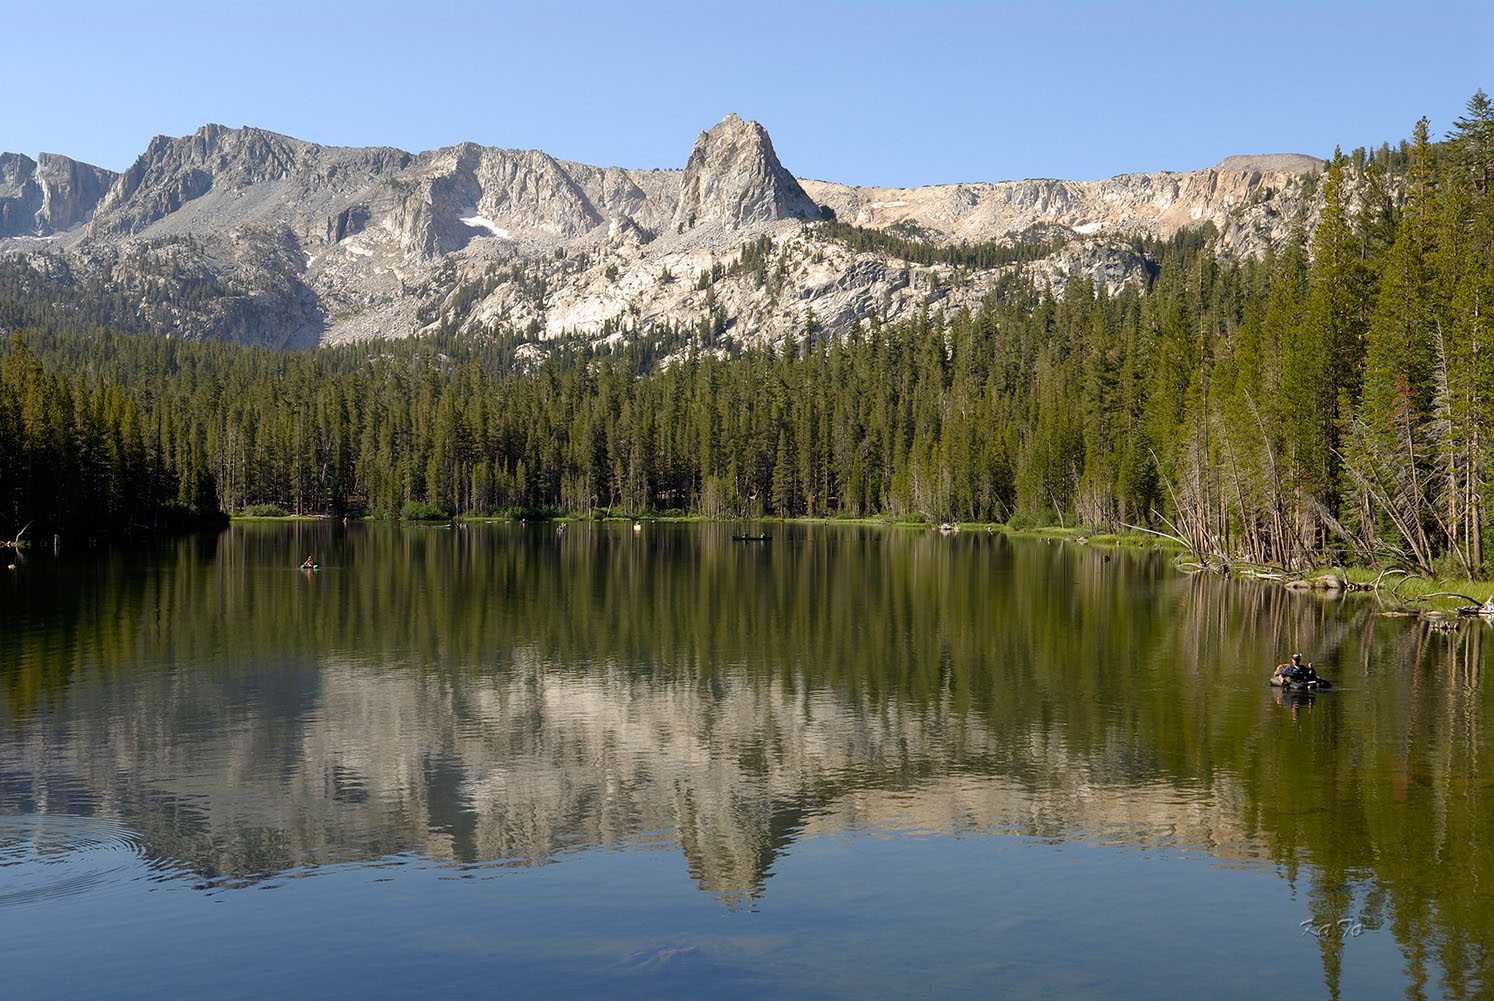 Inyo National Forest - Mannie Lake